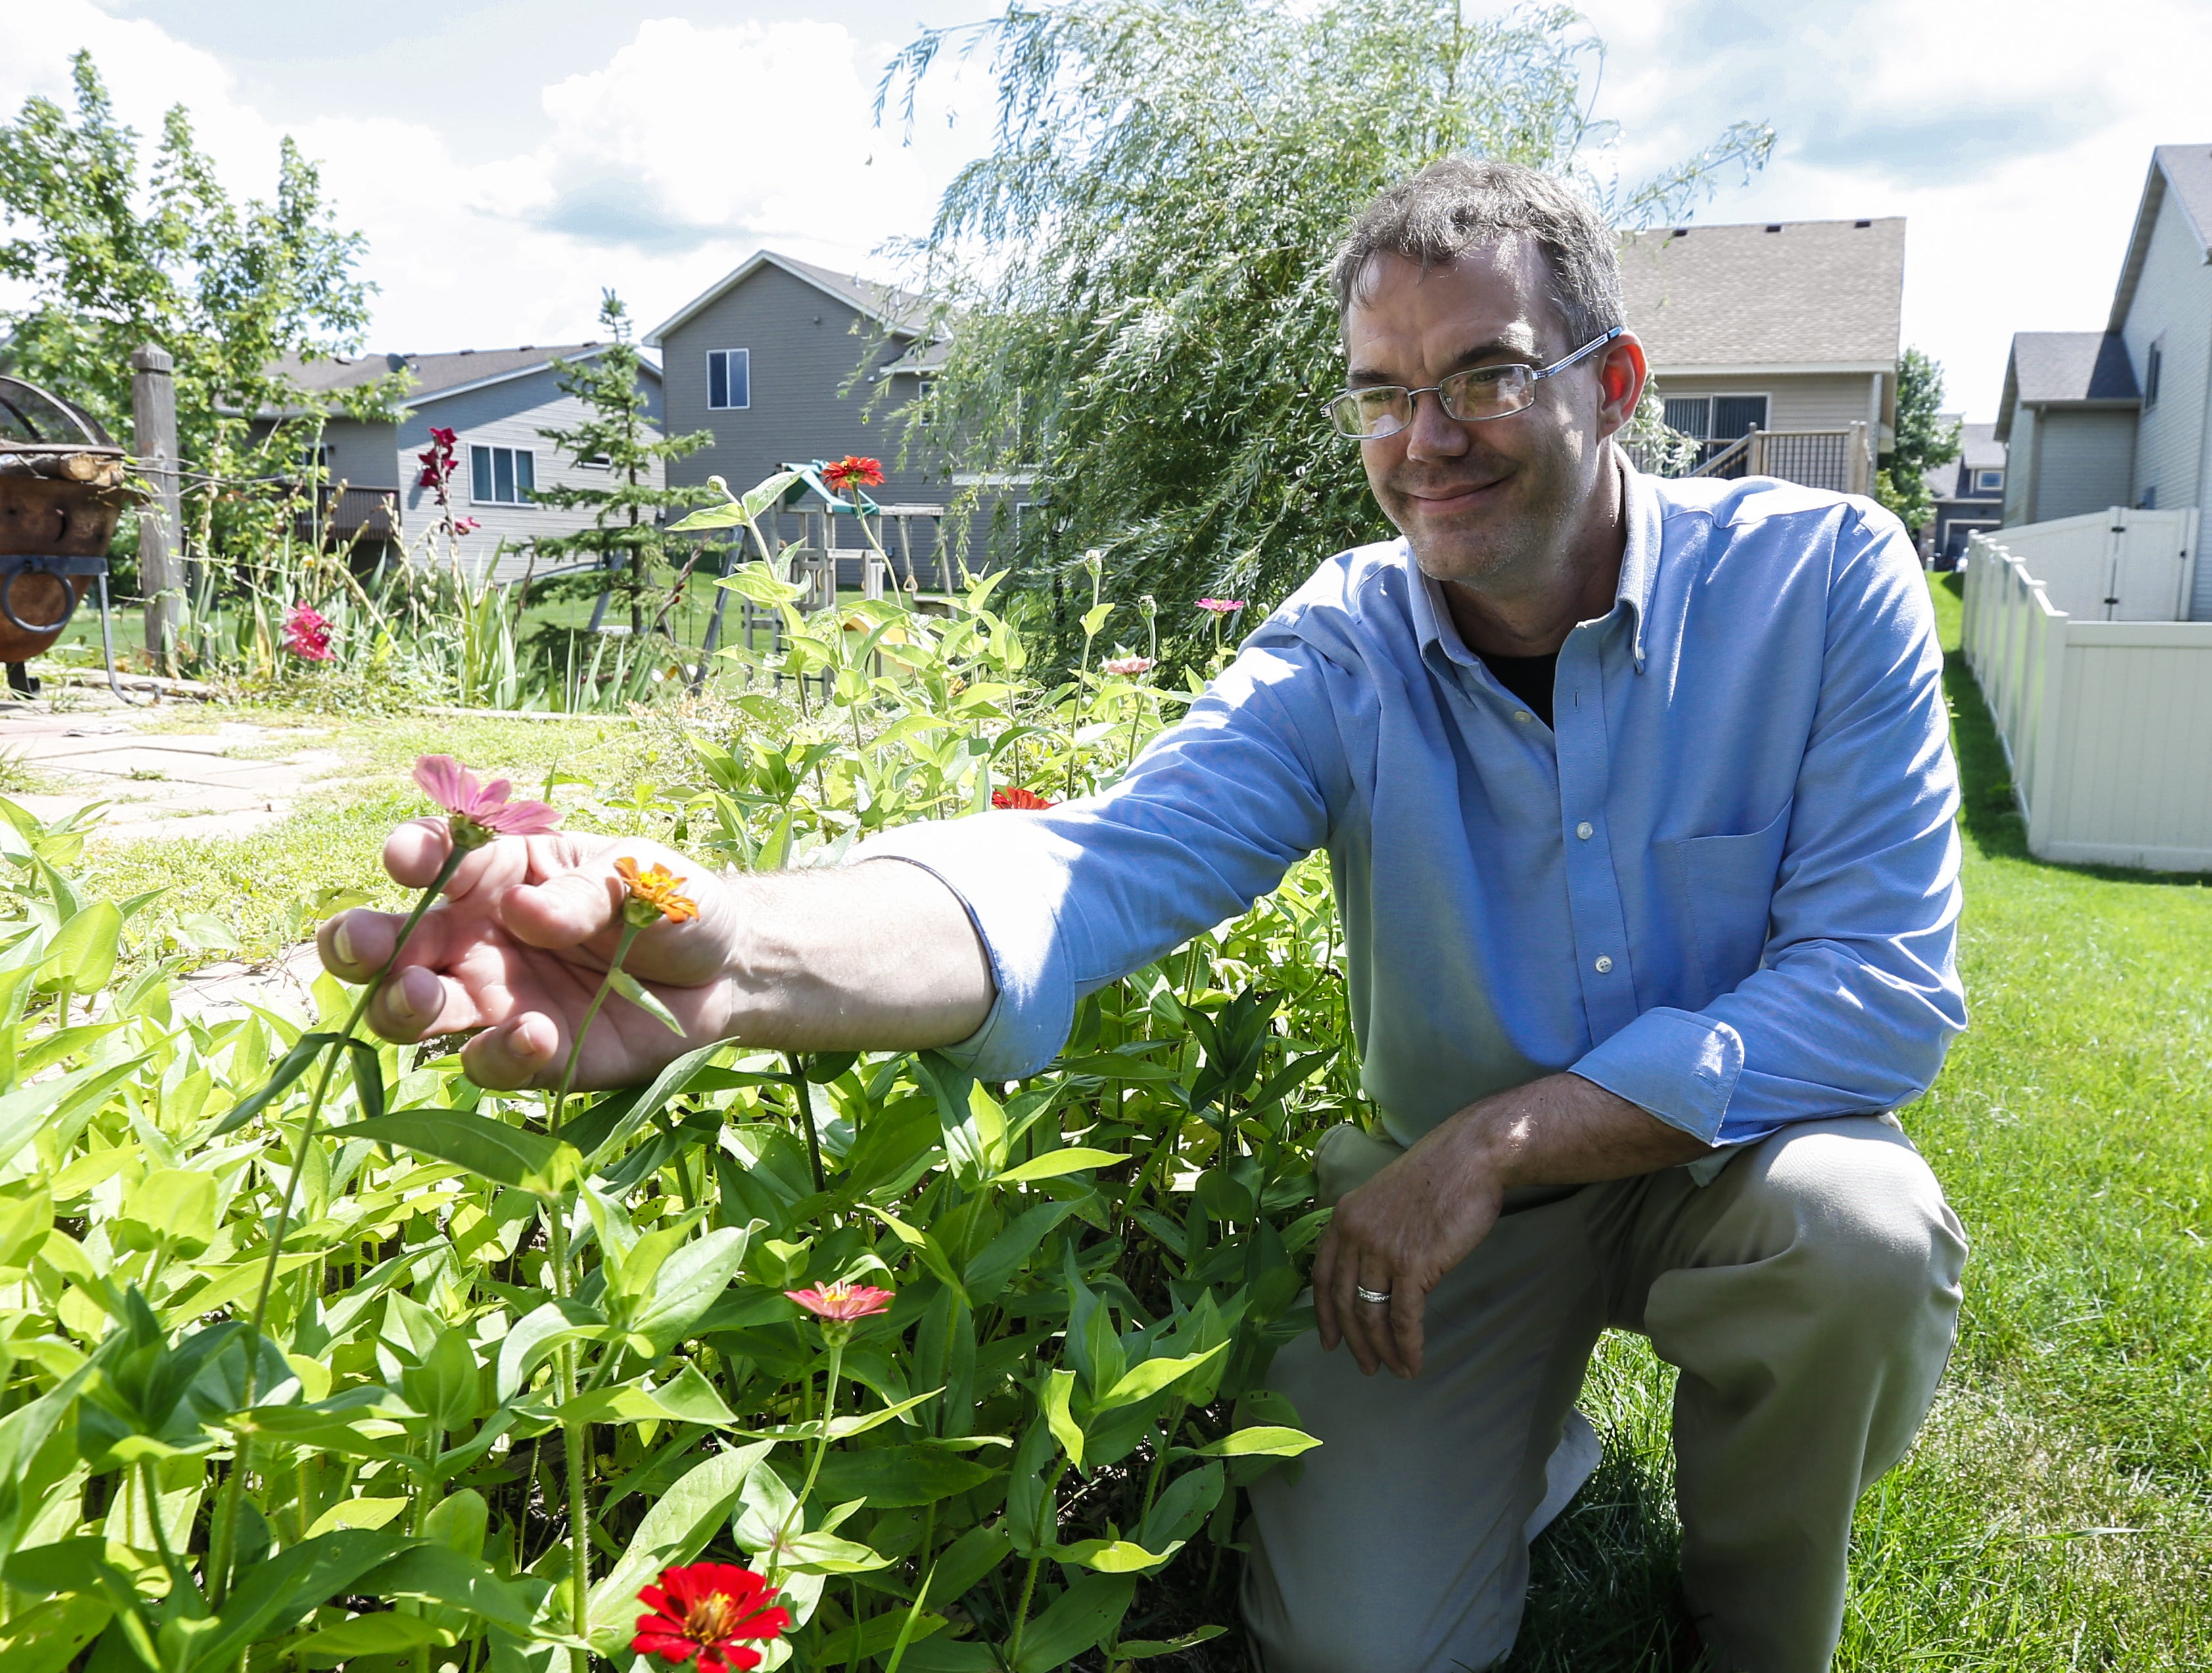 Nate Lindstrom works on his garden in August 2019 at his house in Ramsey, Minn.